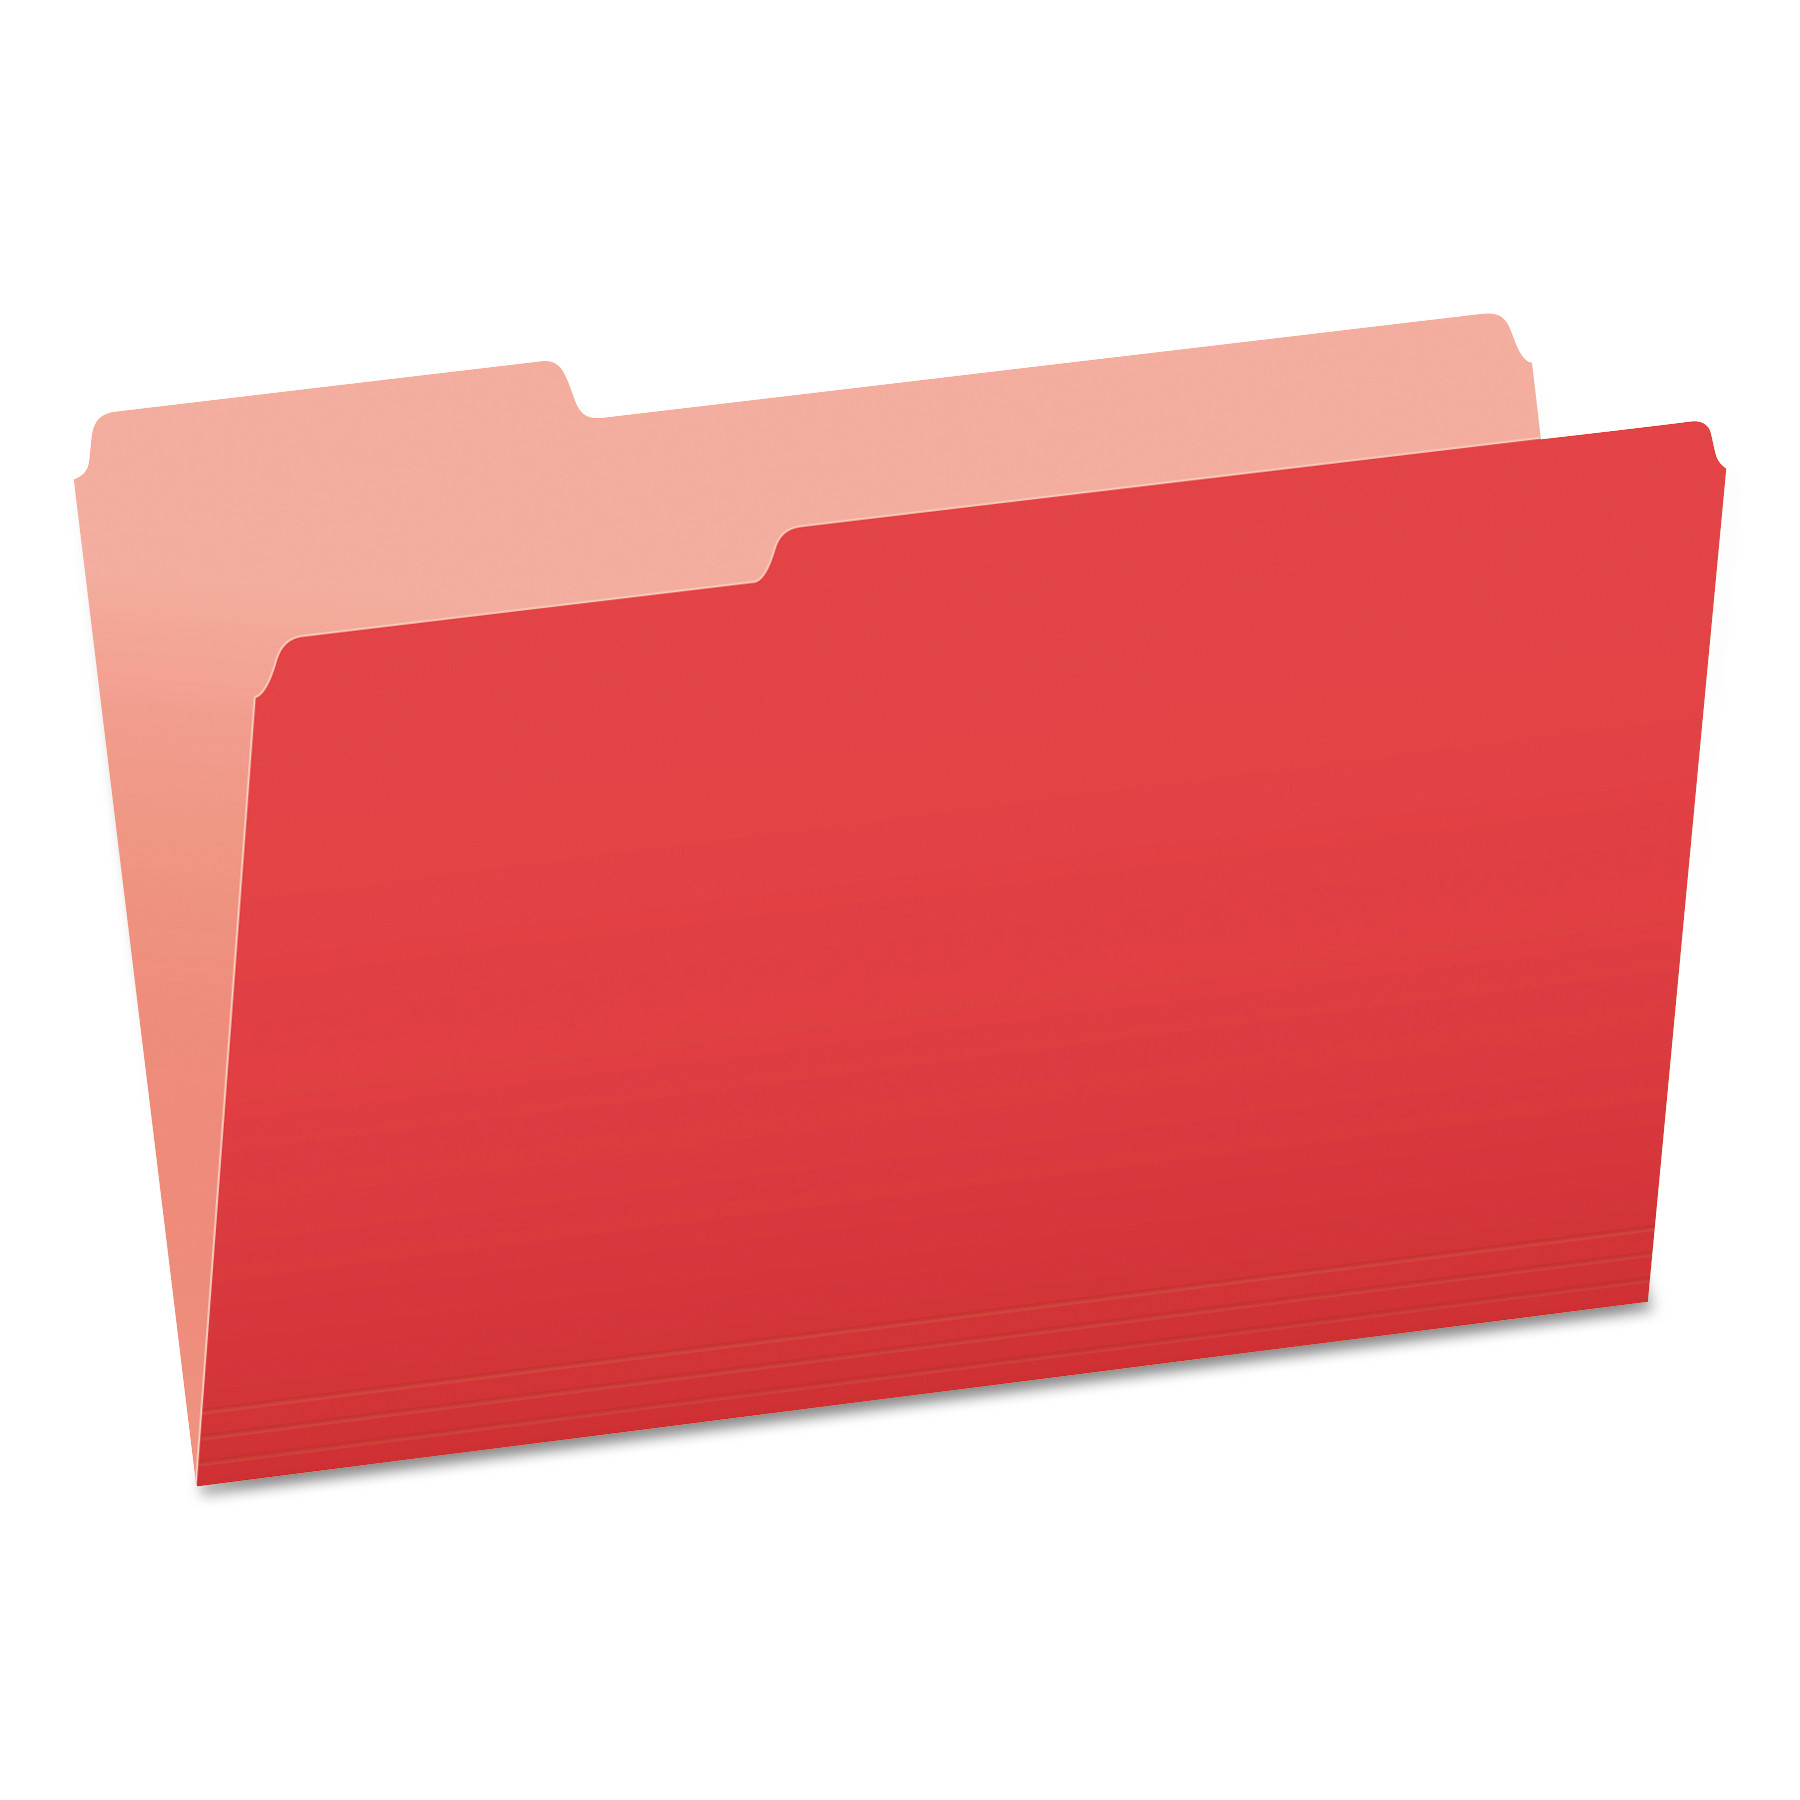  Pendaflex 153 1/3 RED Colored File Folders, 1/3-Cut Tabs, Legal Size, Red/Light Red, 100/Box (PFX15313RED) 